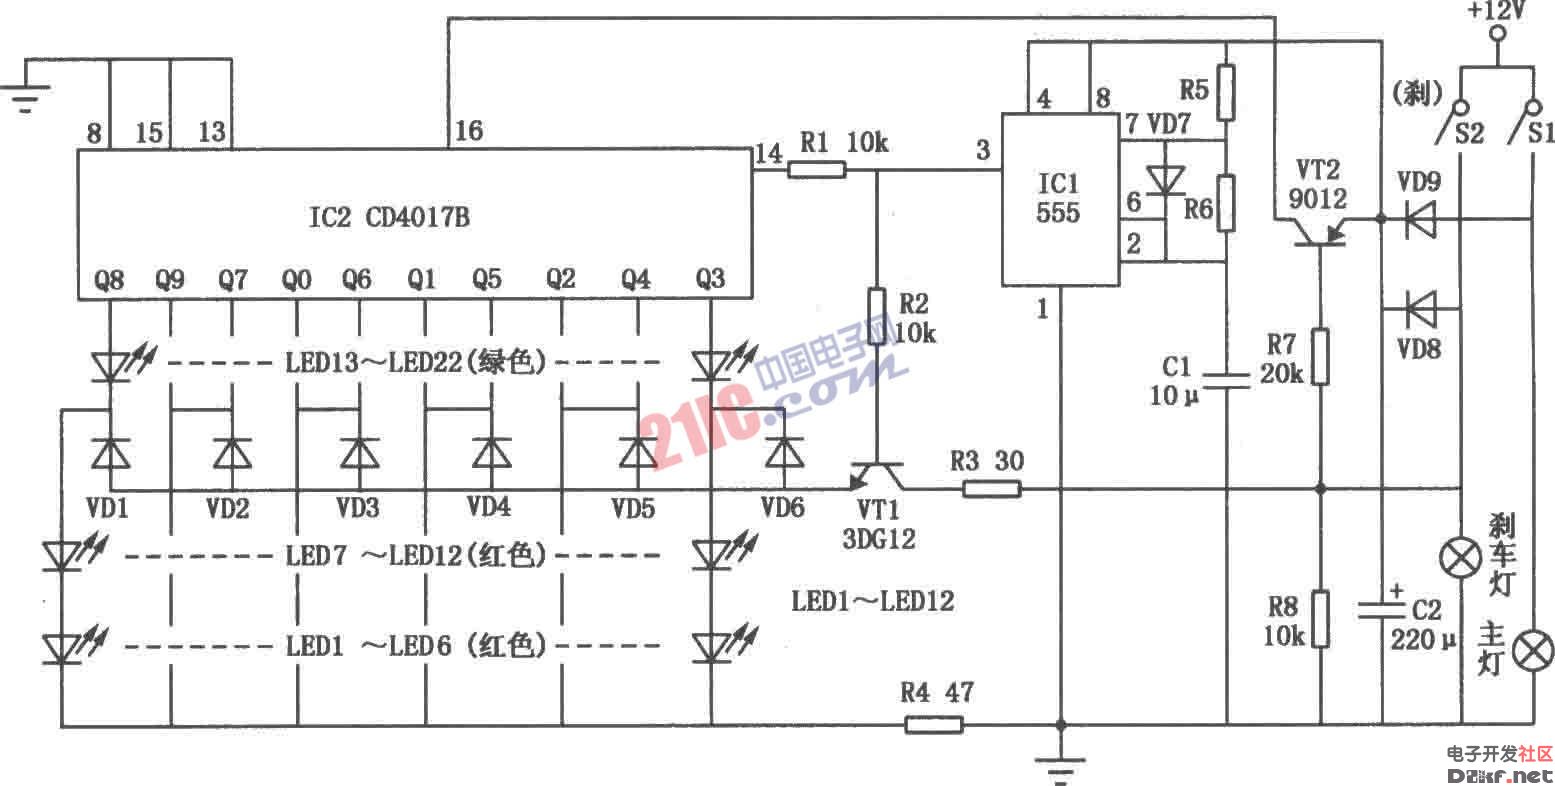 Motorcycle color flashing taillight circuit diagram